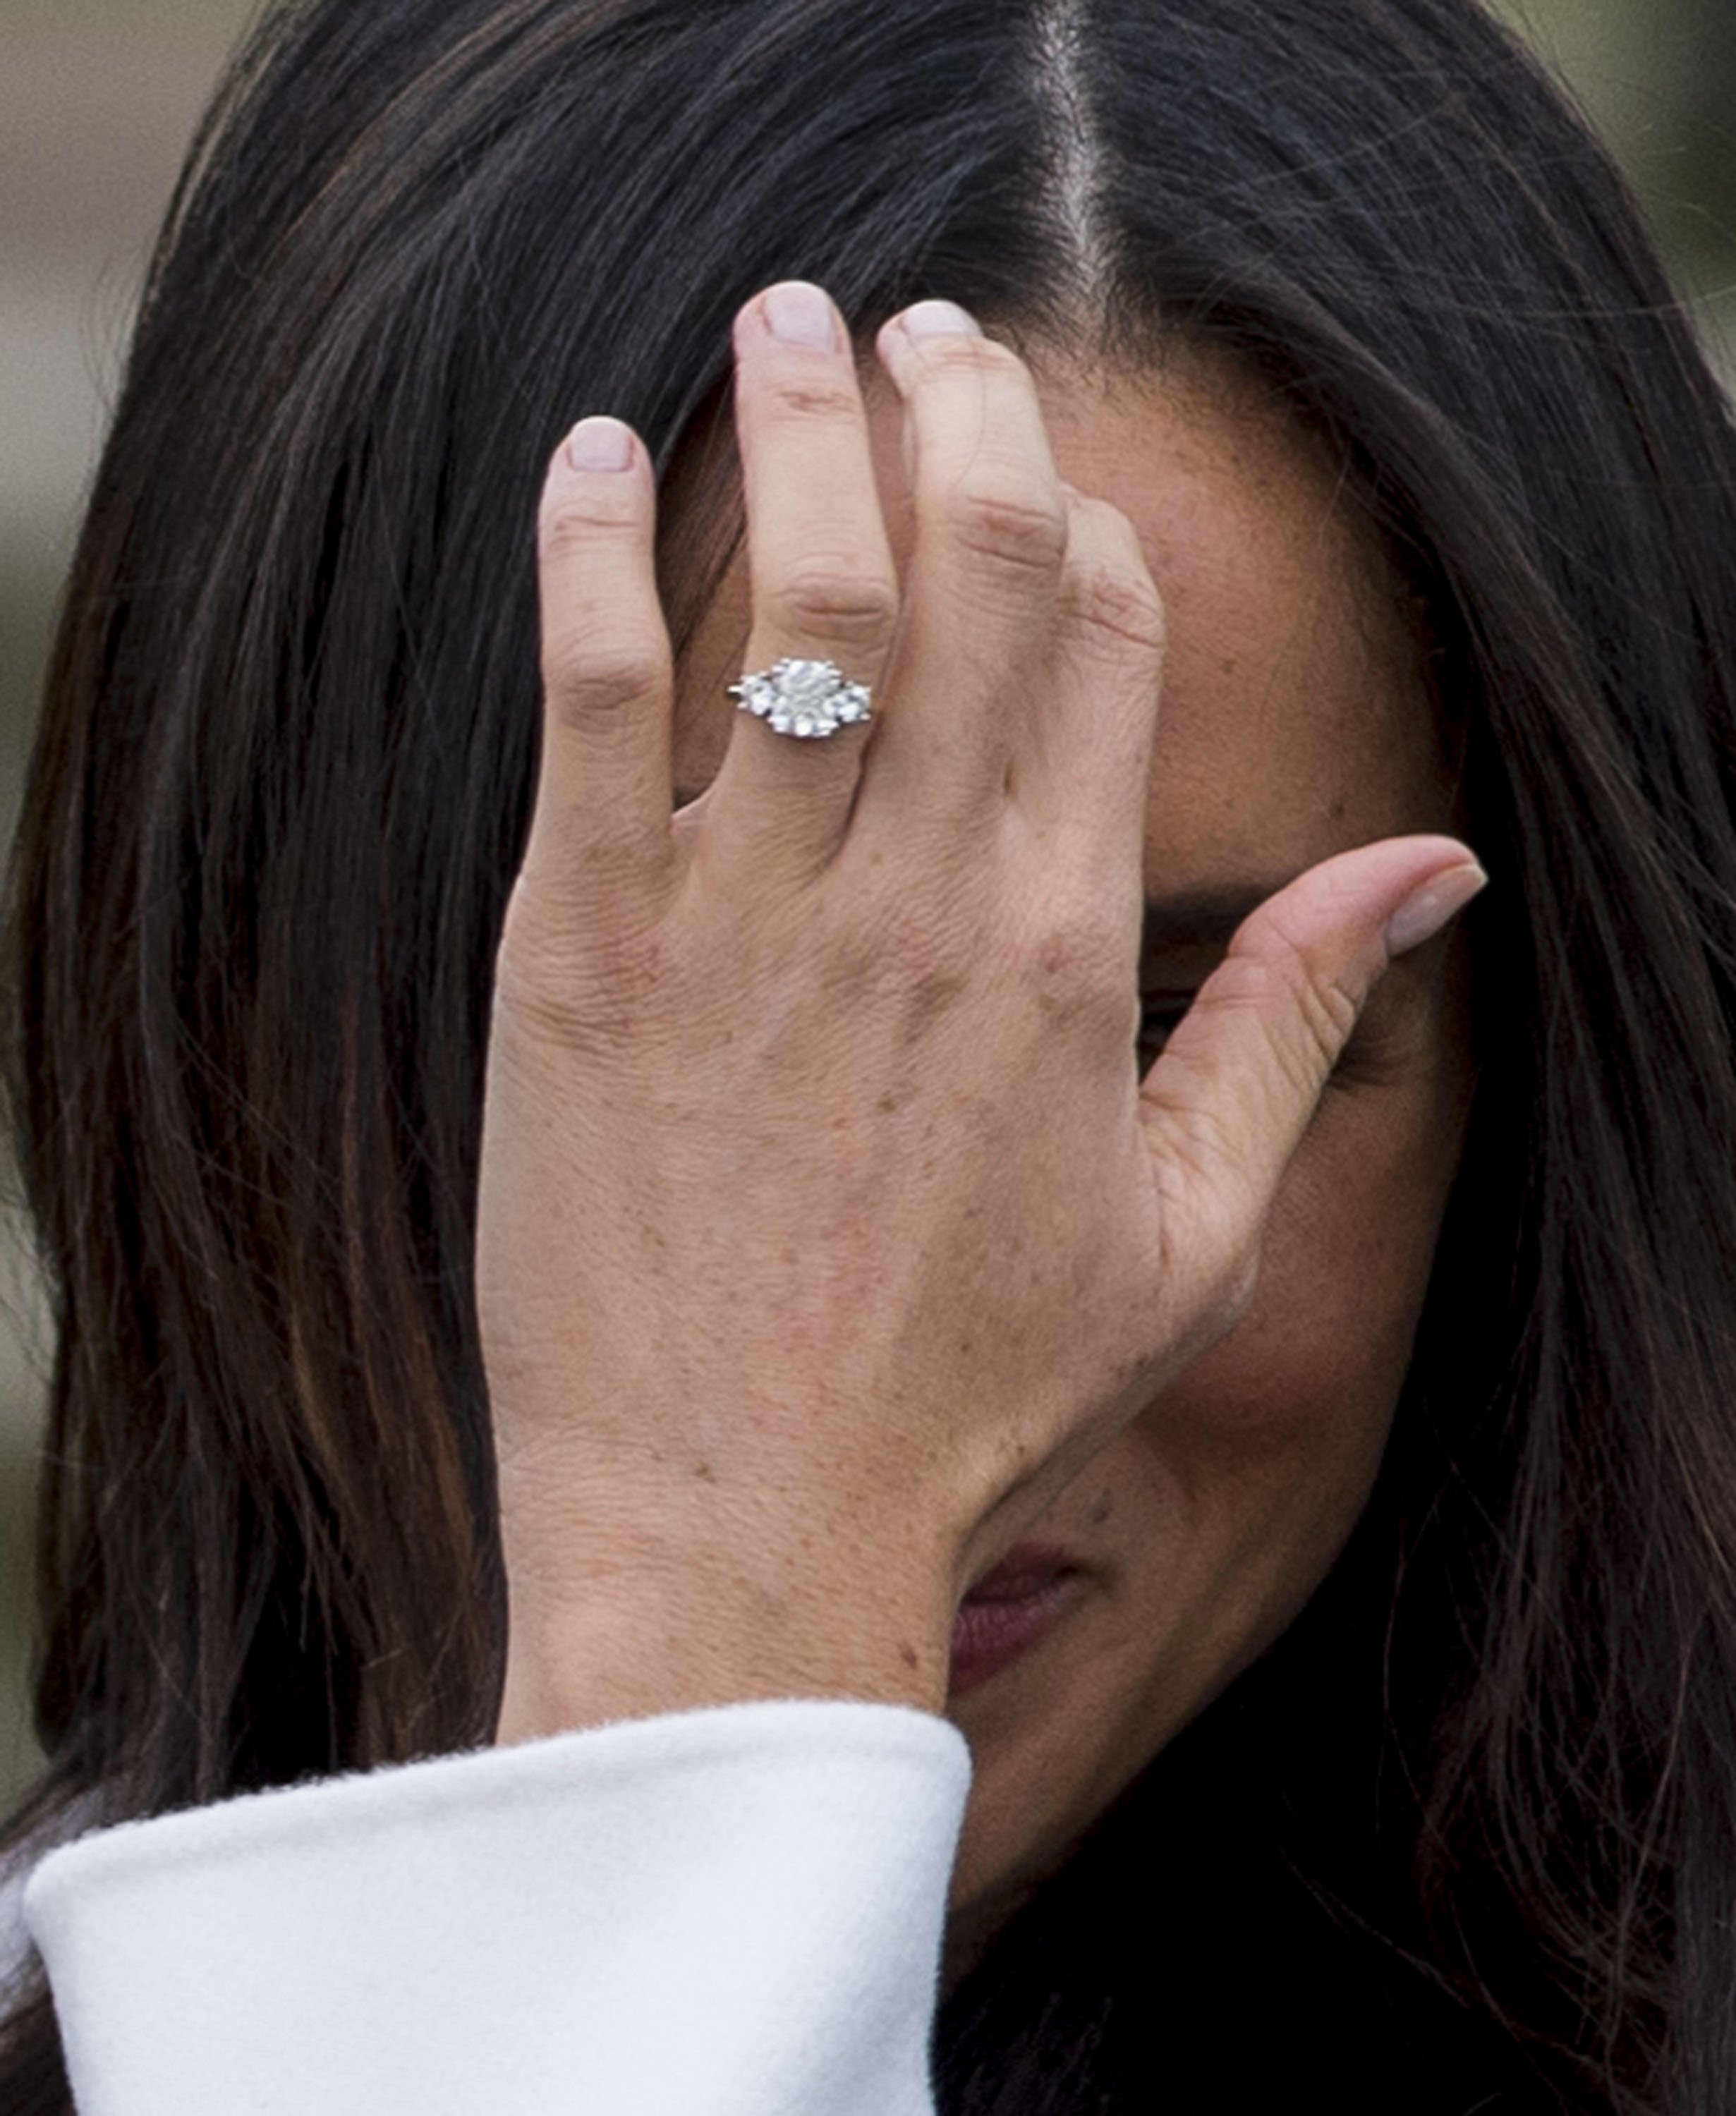 Meghan Markle's Engagement Ring Is 